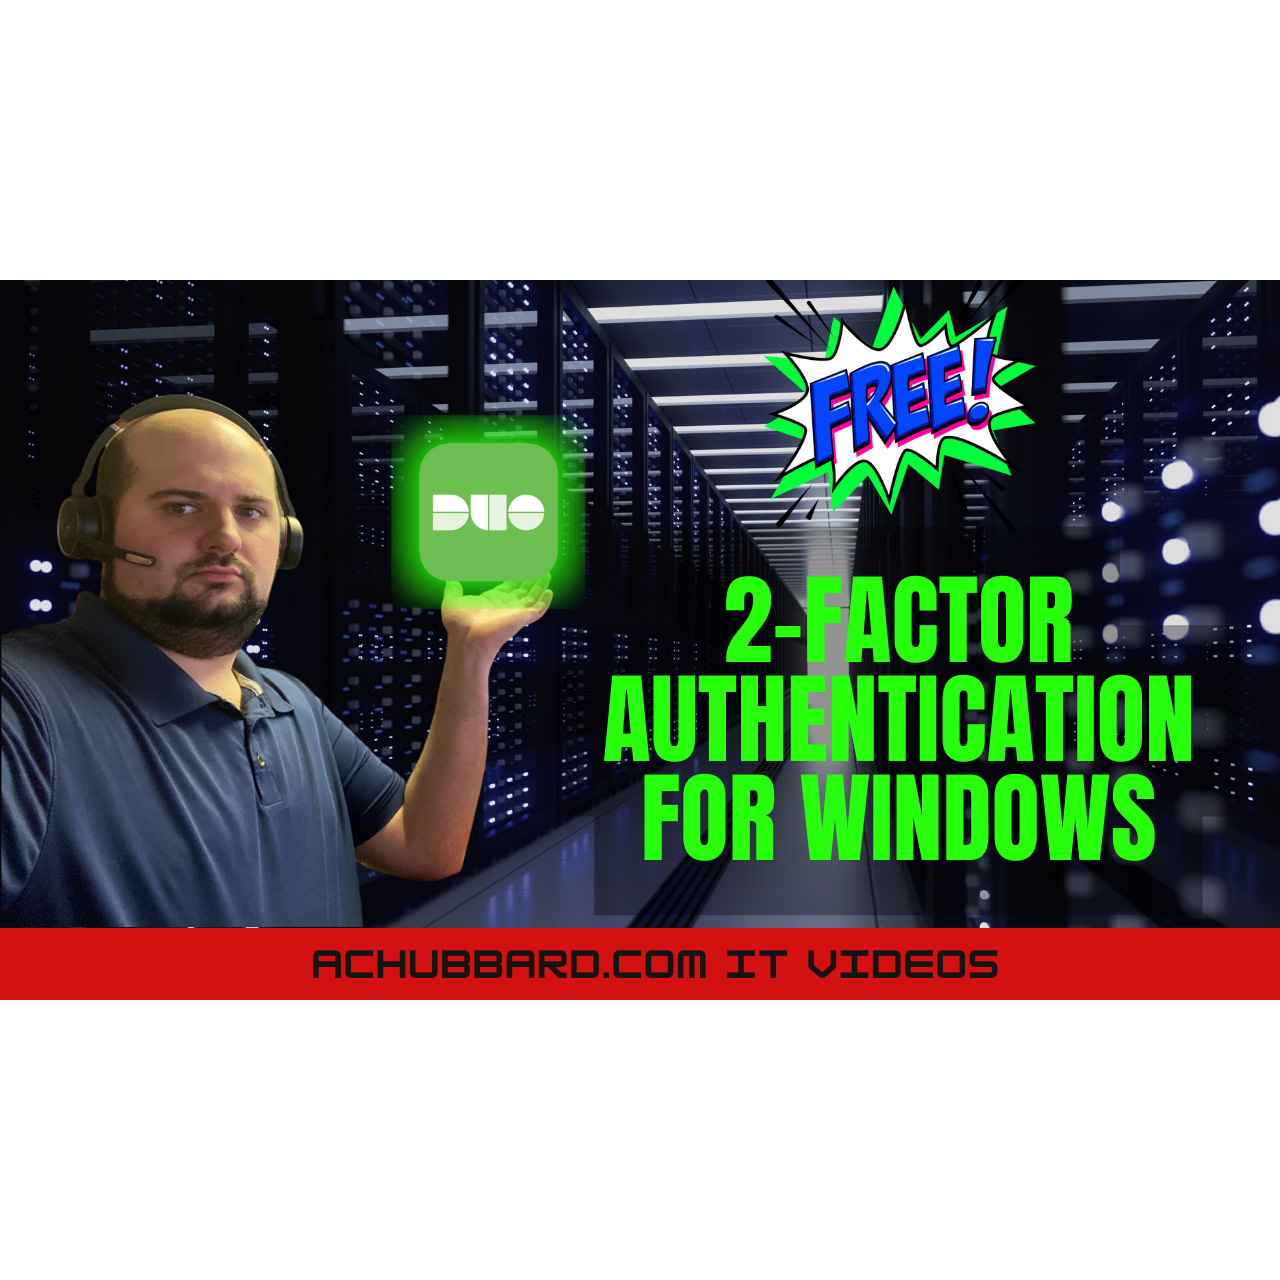 If you're looking to add a little extra security to your homelab or home network, this is a great way to do so. We're going to leverage Duo's free tier of MFA products, Duo MFA, to add another layer of protection to our homelab.
 #2factorauthentication #2fa #2faforwindows #activedirectory #duo #duo2fa #duofree #duomfa #HomeLab #Homelab #mfa #multifactorauthentication #server #Windows #windowsserver

https://www.youtube.com/watch?v=KA9xGt4sqds